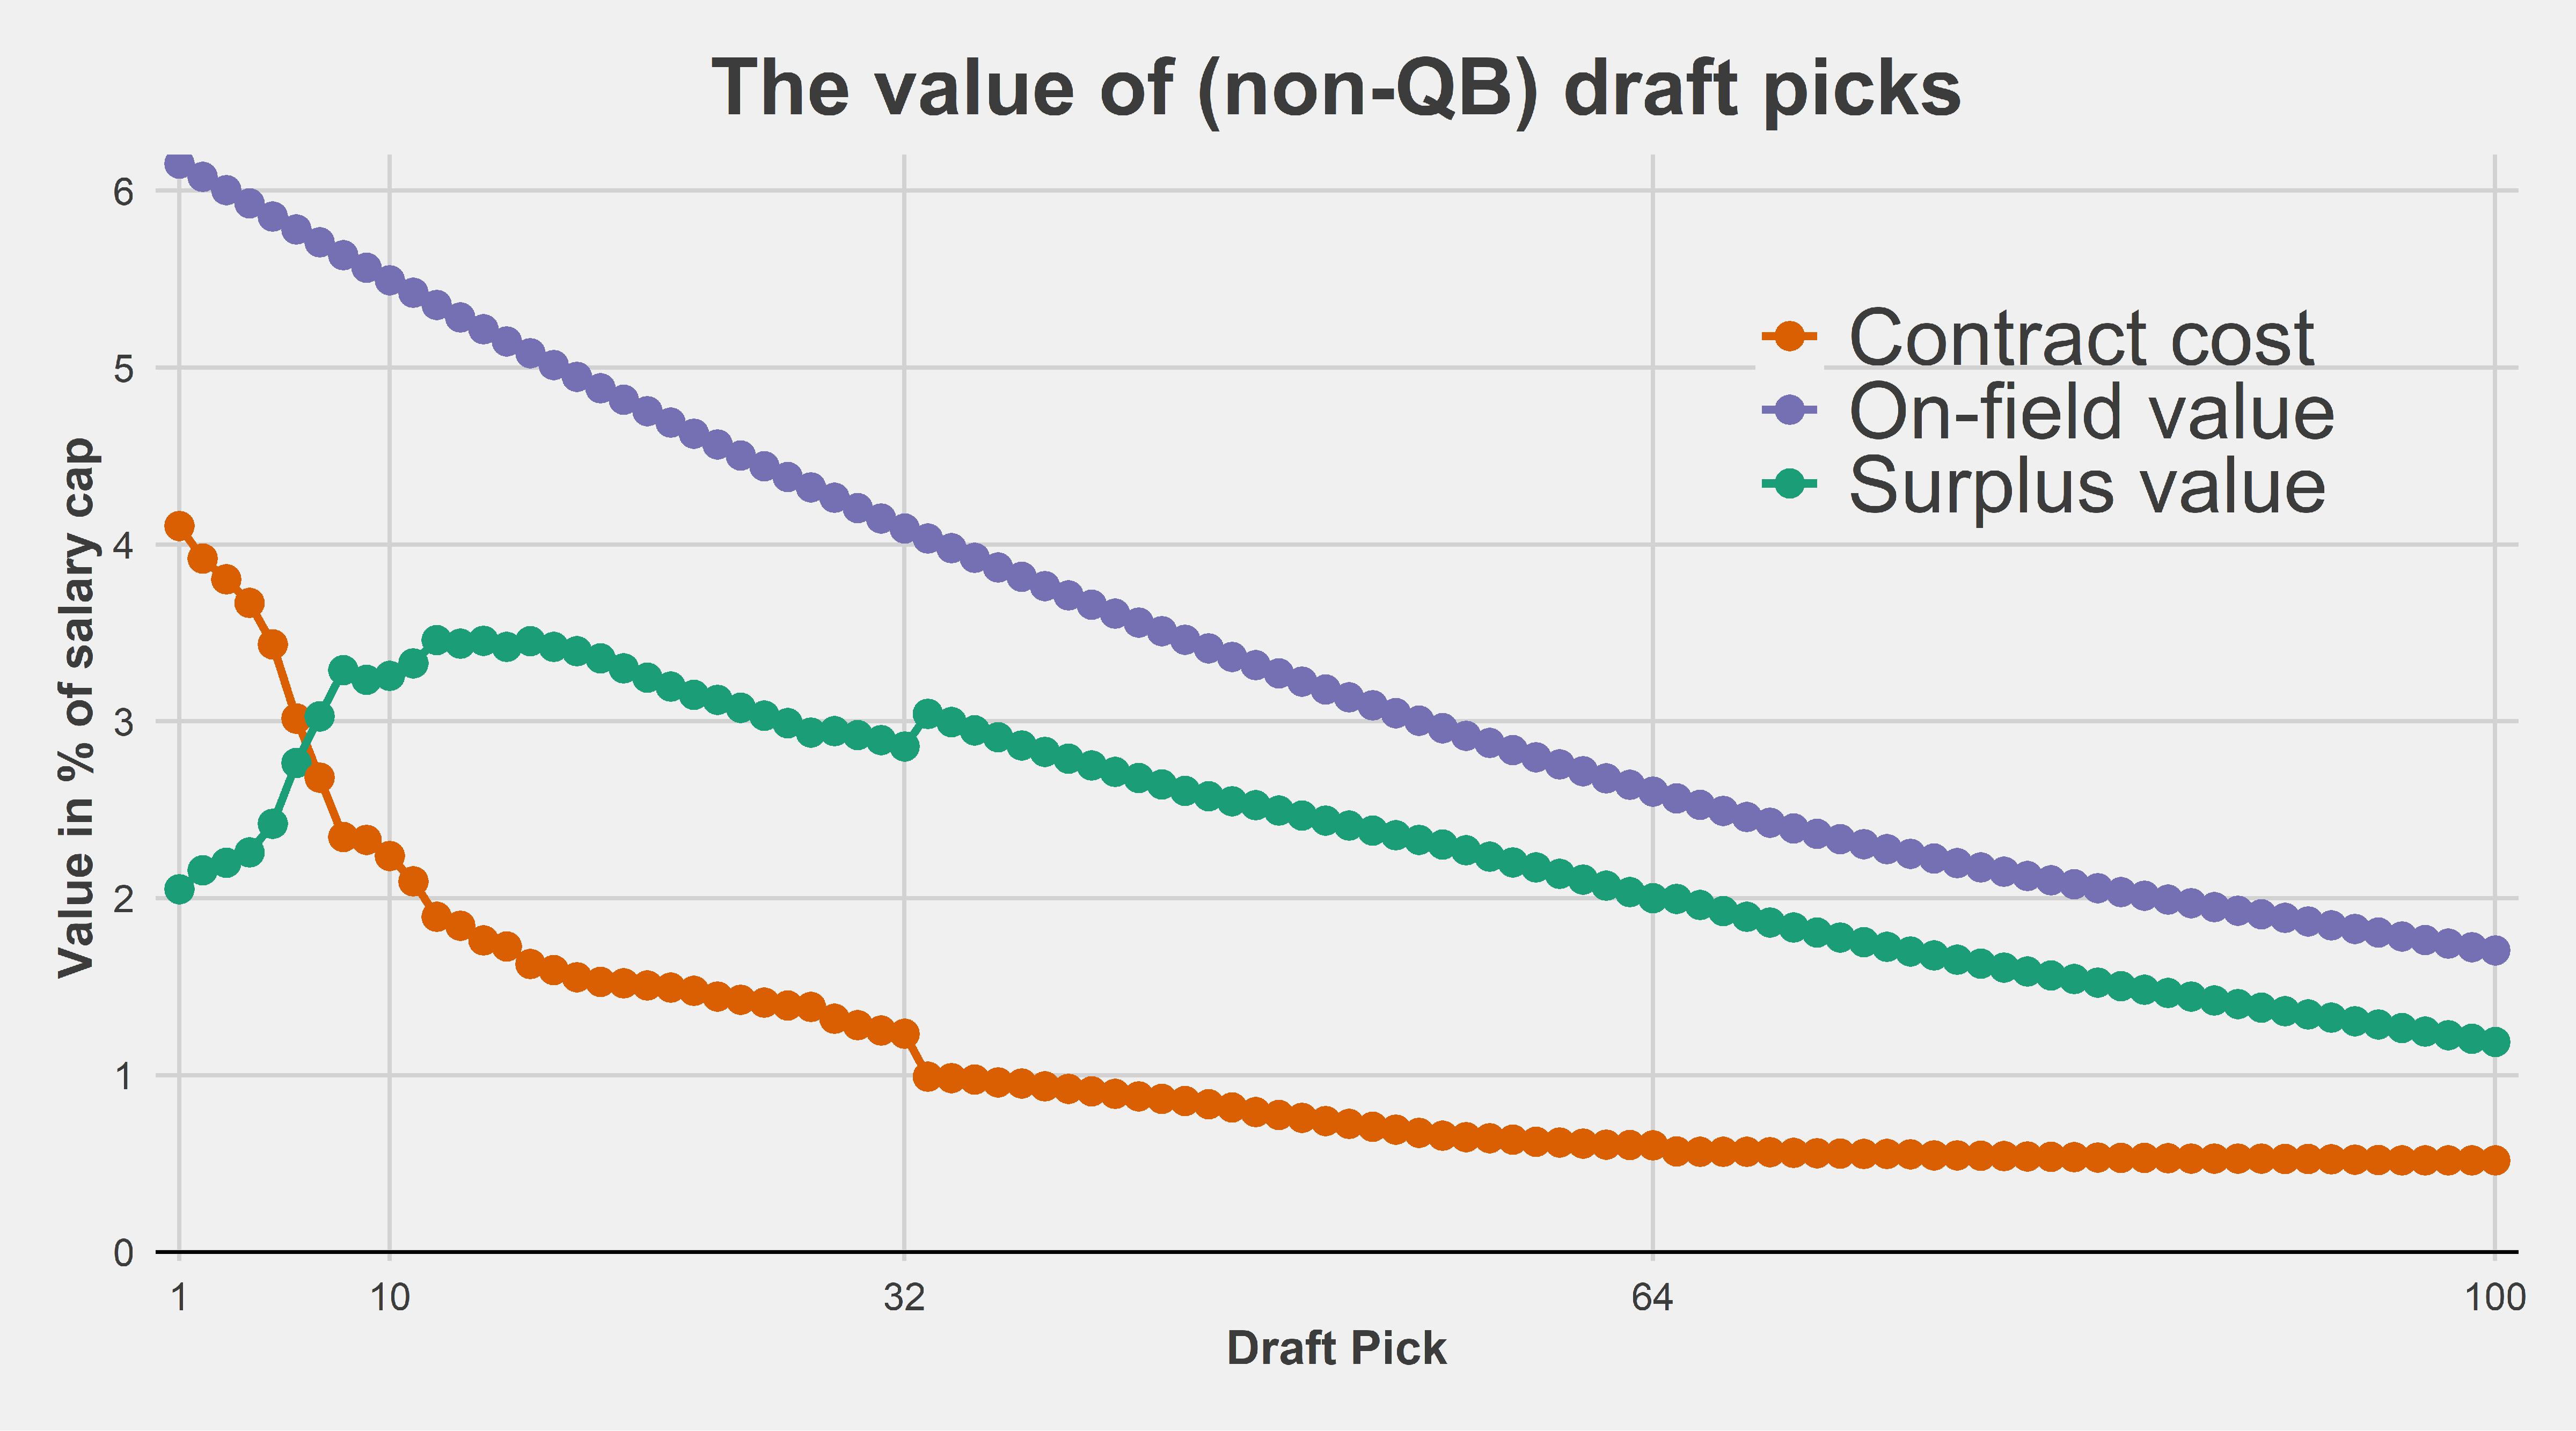 Chart showing the value of non-QB draft picks